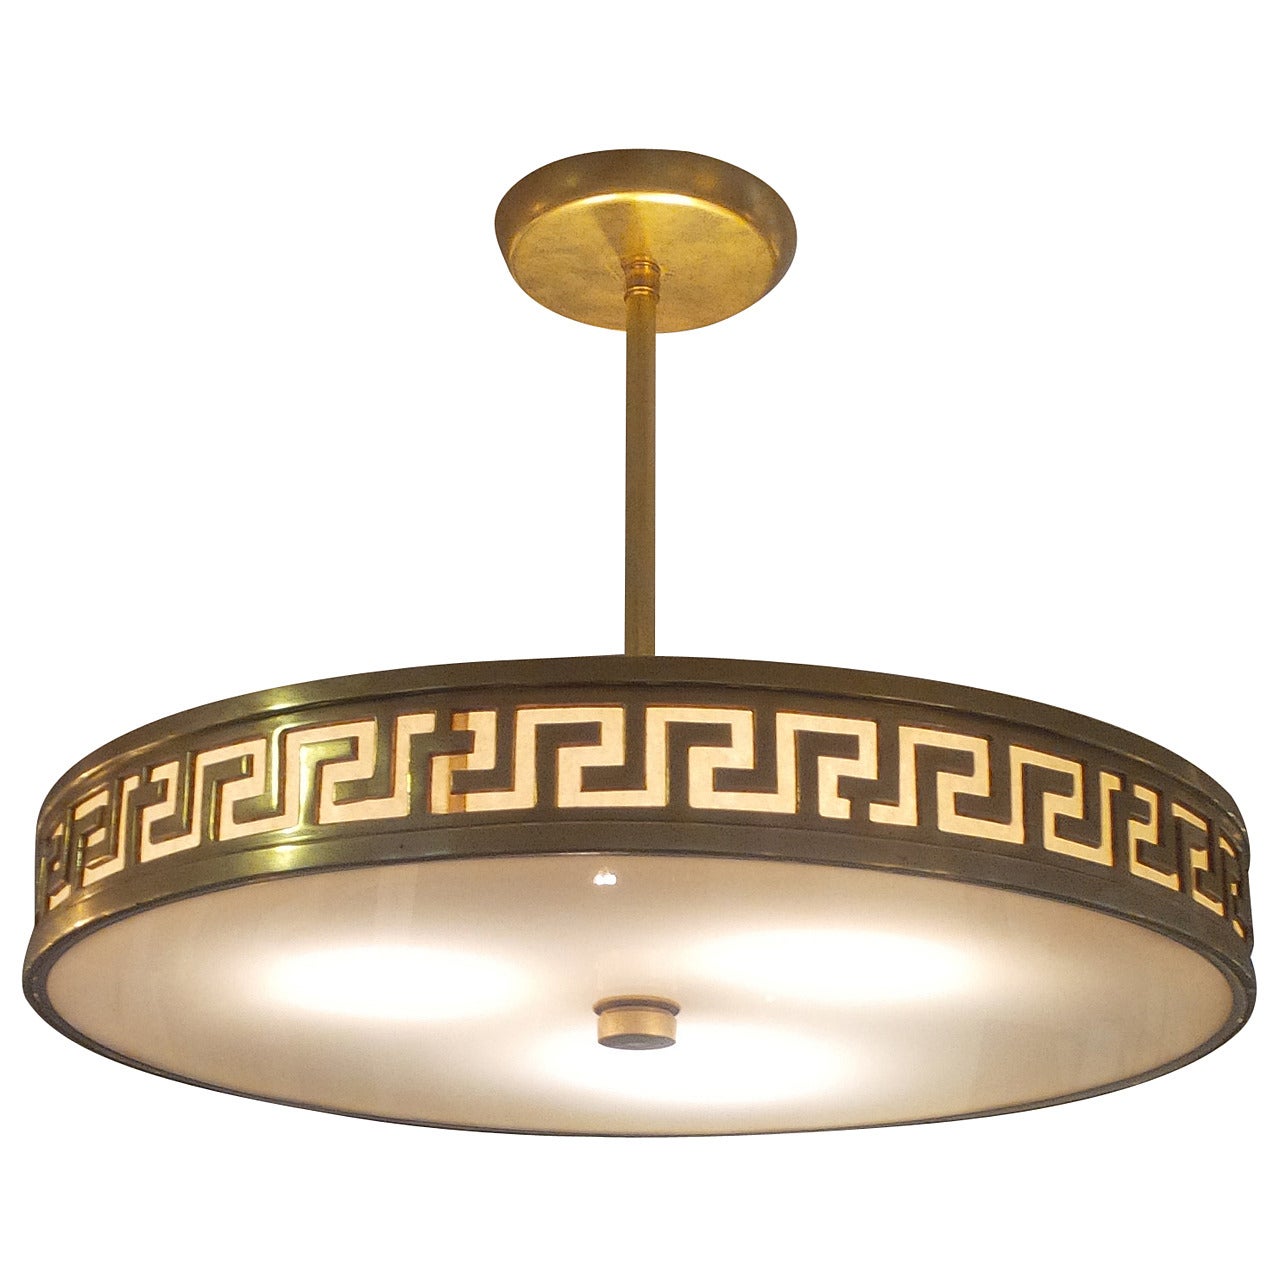 French Greek Key Bronze Light Fixture, Available as Pendant or Flush Mount